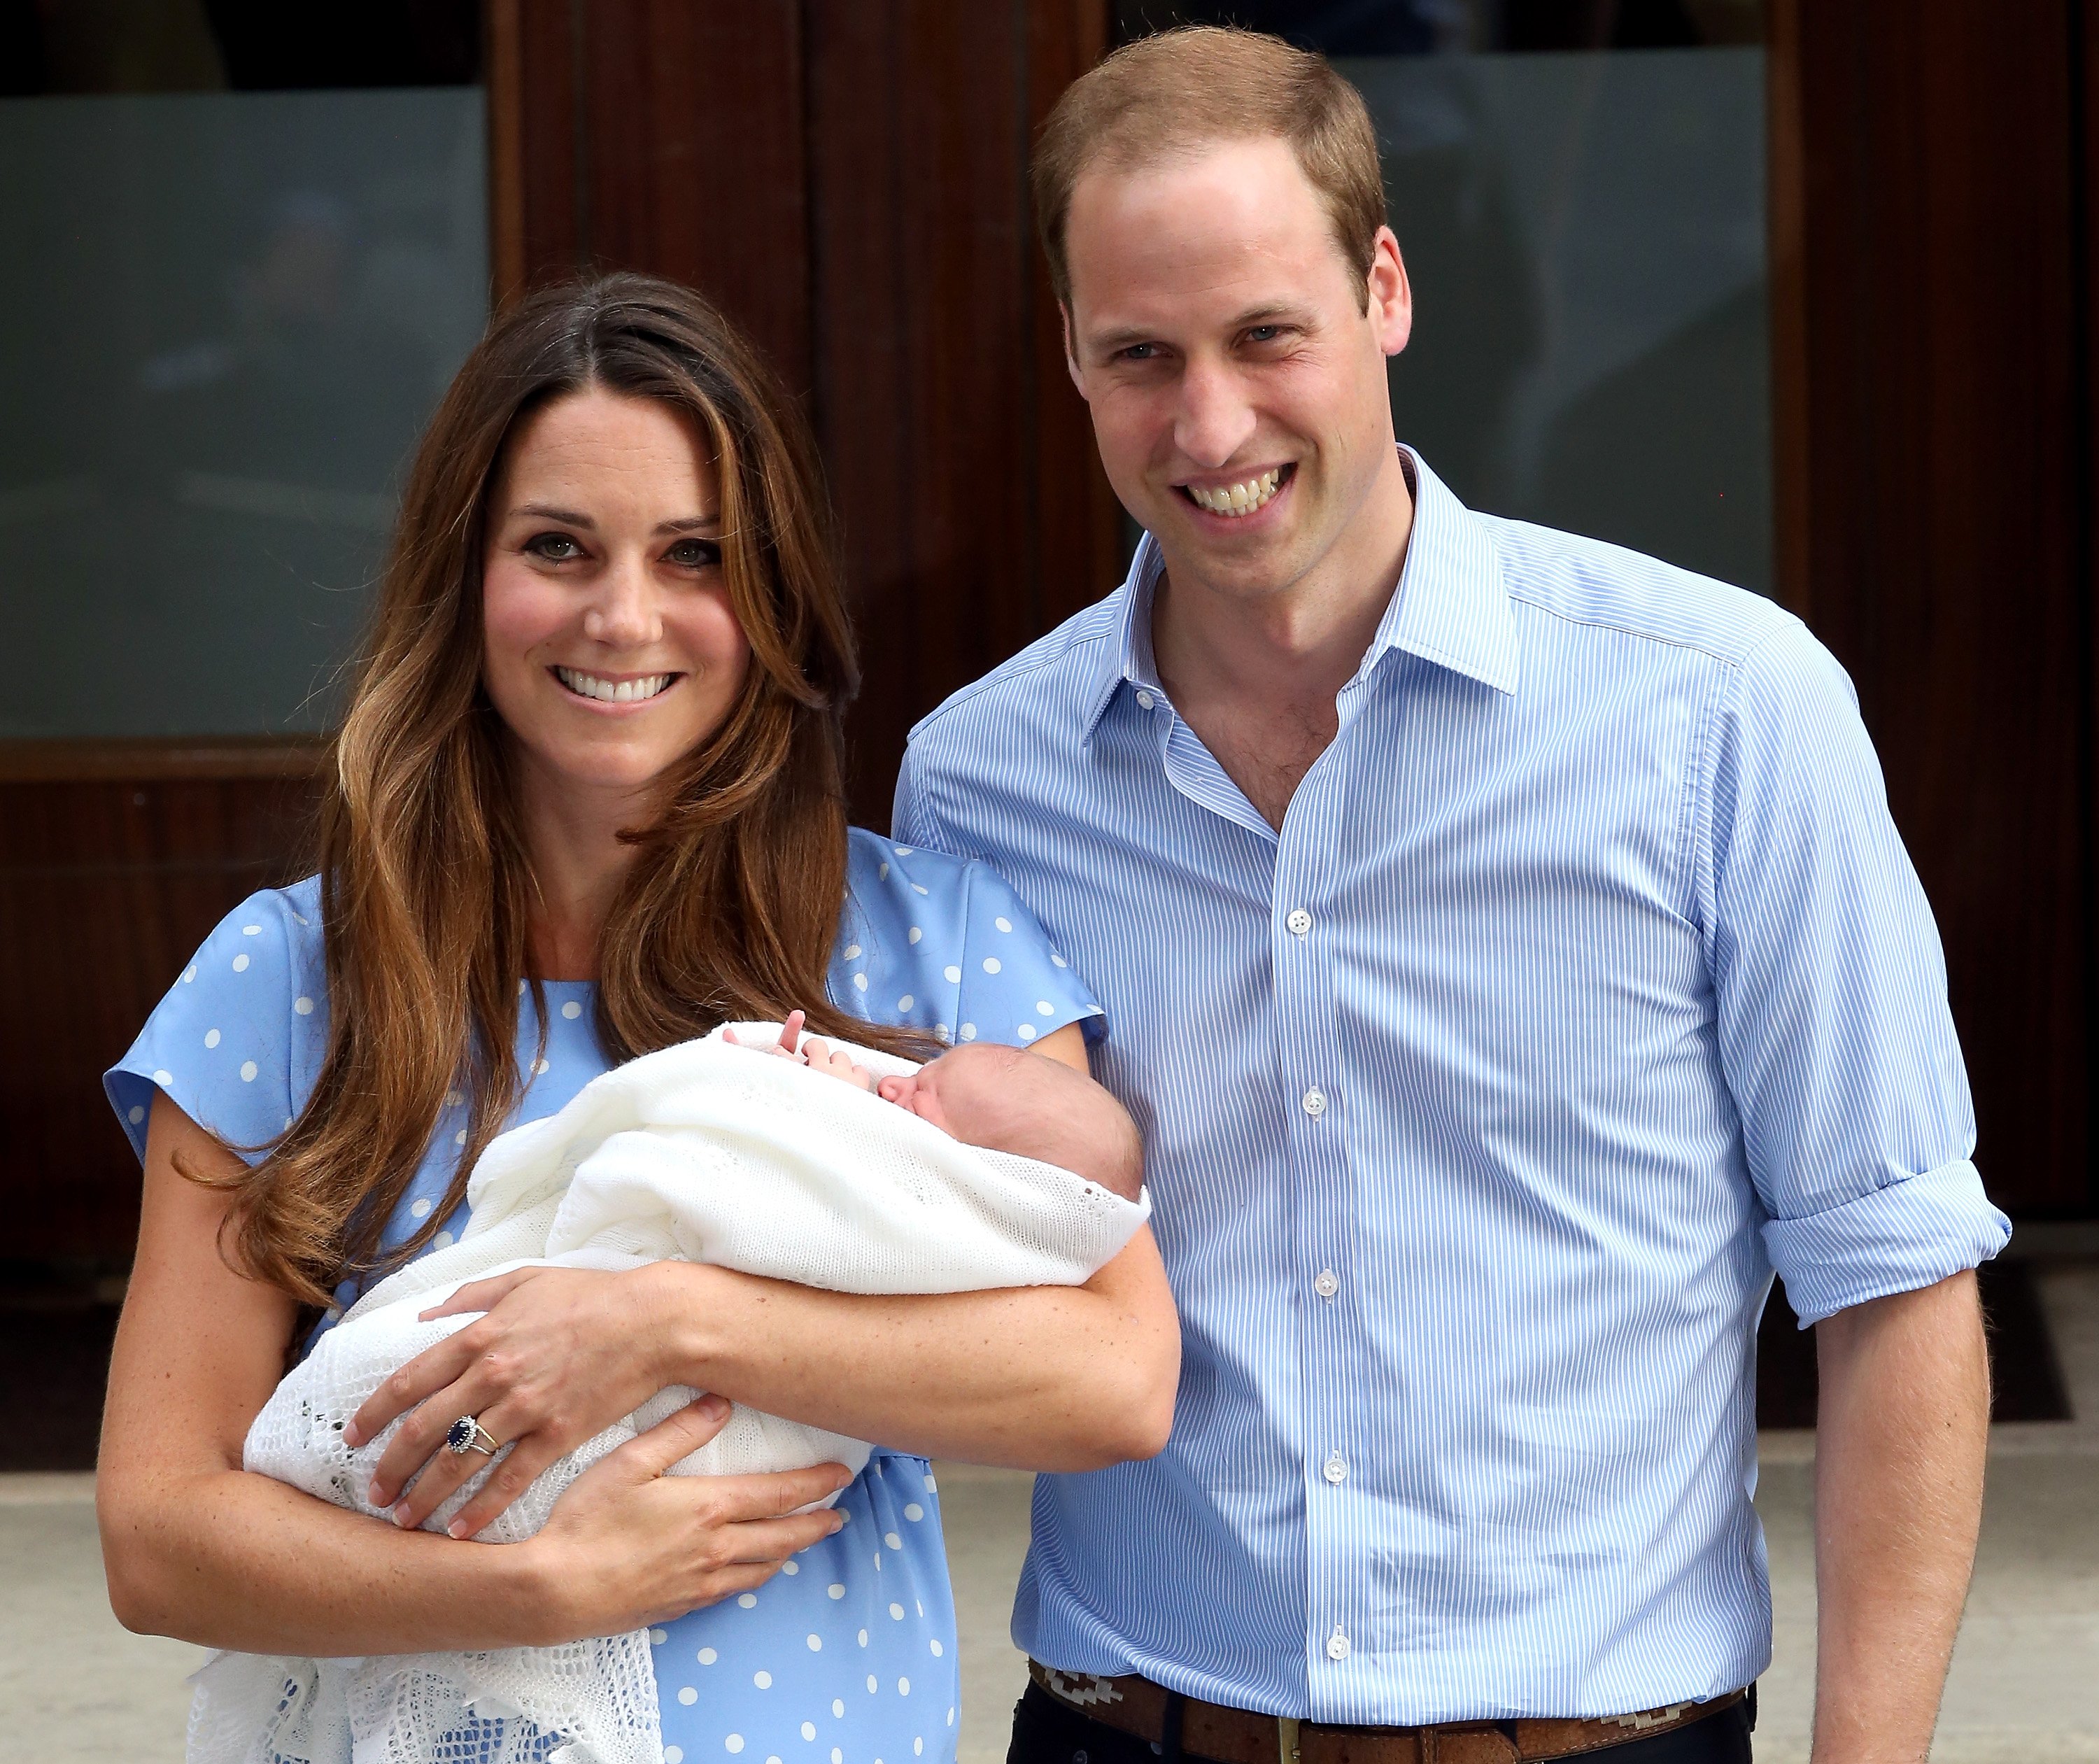 Prince William, Duke of Cambridge and Catherine, Duchess of Cambridge, depart The Lindo Wing with their newborn son at St Mary's Hospital on July 23, 2013 in London, England. | Source: Getty Images